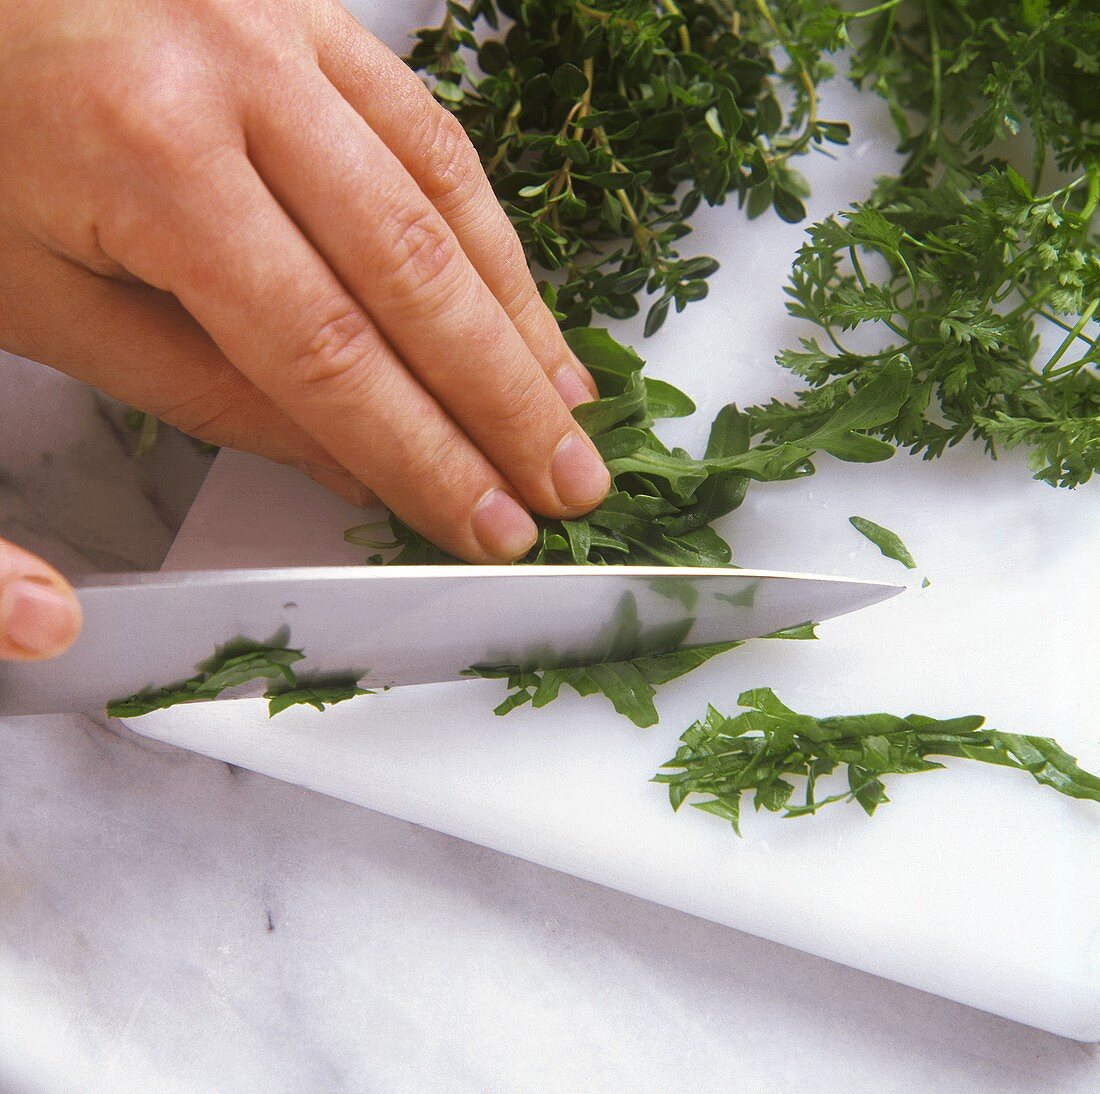 Chopping herbs with a knife